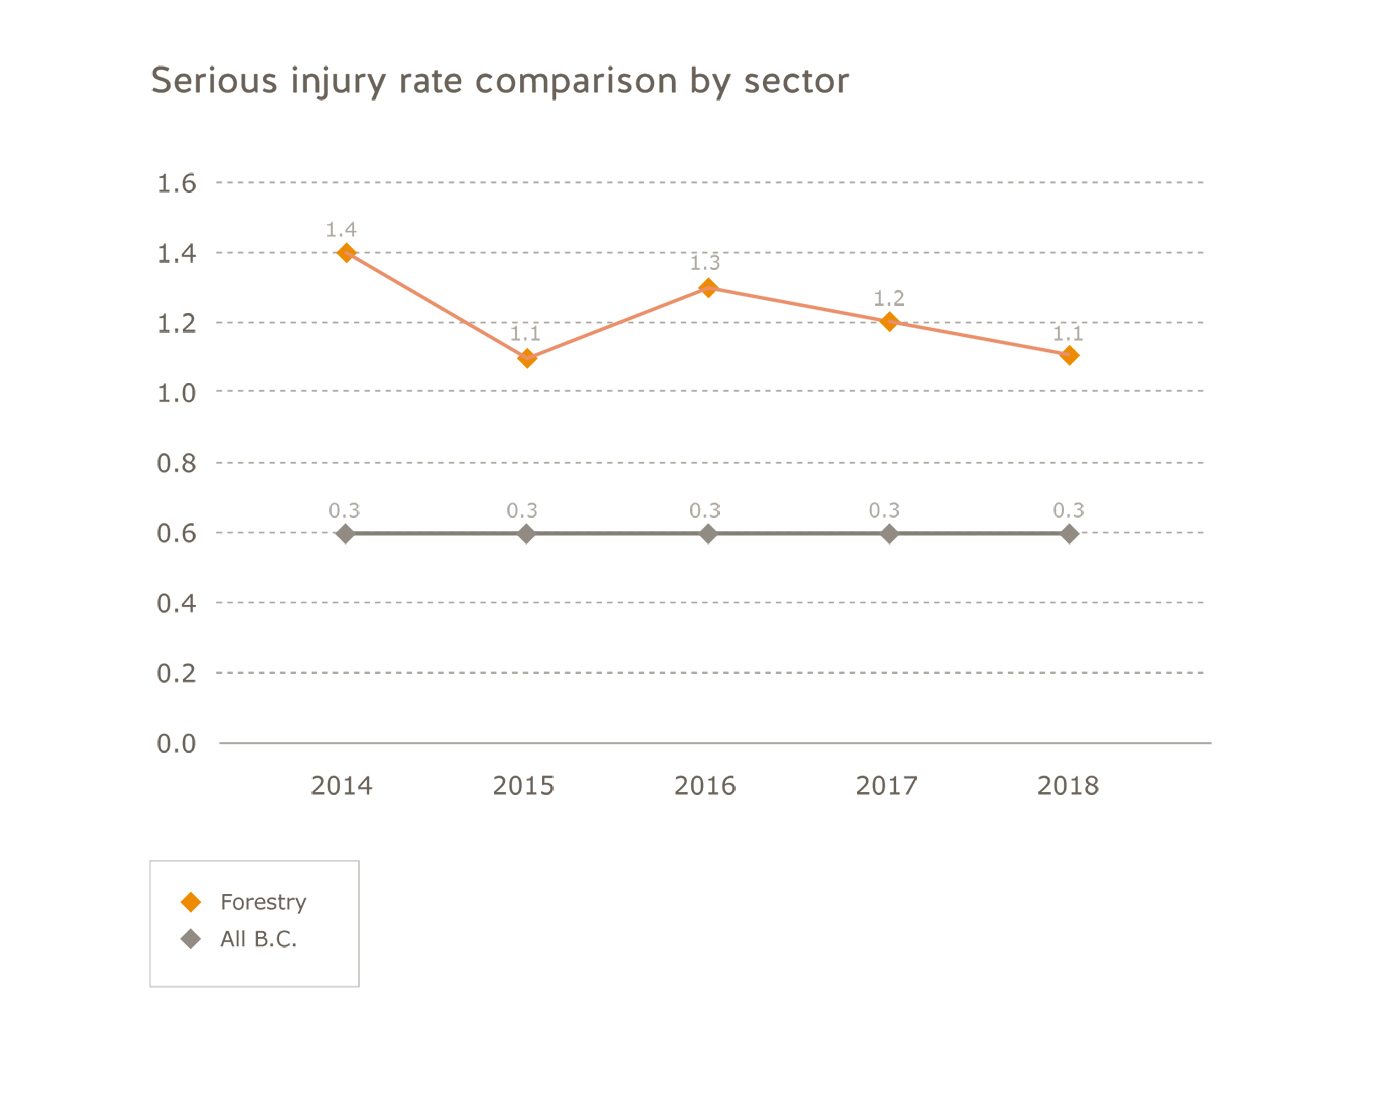 Forestry sector serious injury rate comparison by sector for 2014 to 2018. All B.C.: 2014=0.3; 2015=0.3; 2016=0.3; 2017=0.3; 2018=0.3. Forestry: 2014=1.4; 2015=1.1; 2016=1.3; 2017=1.2; 2018=1.1